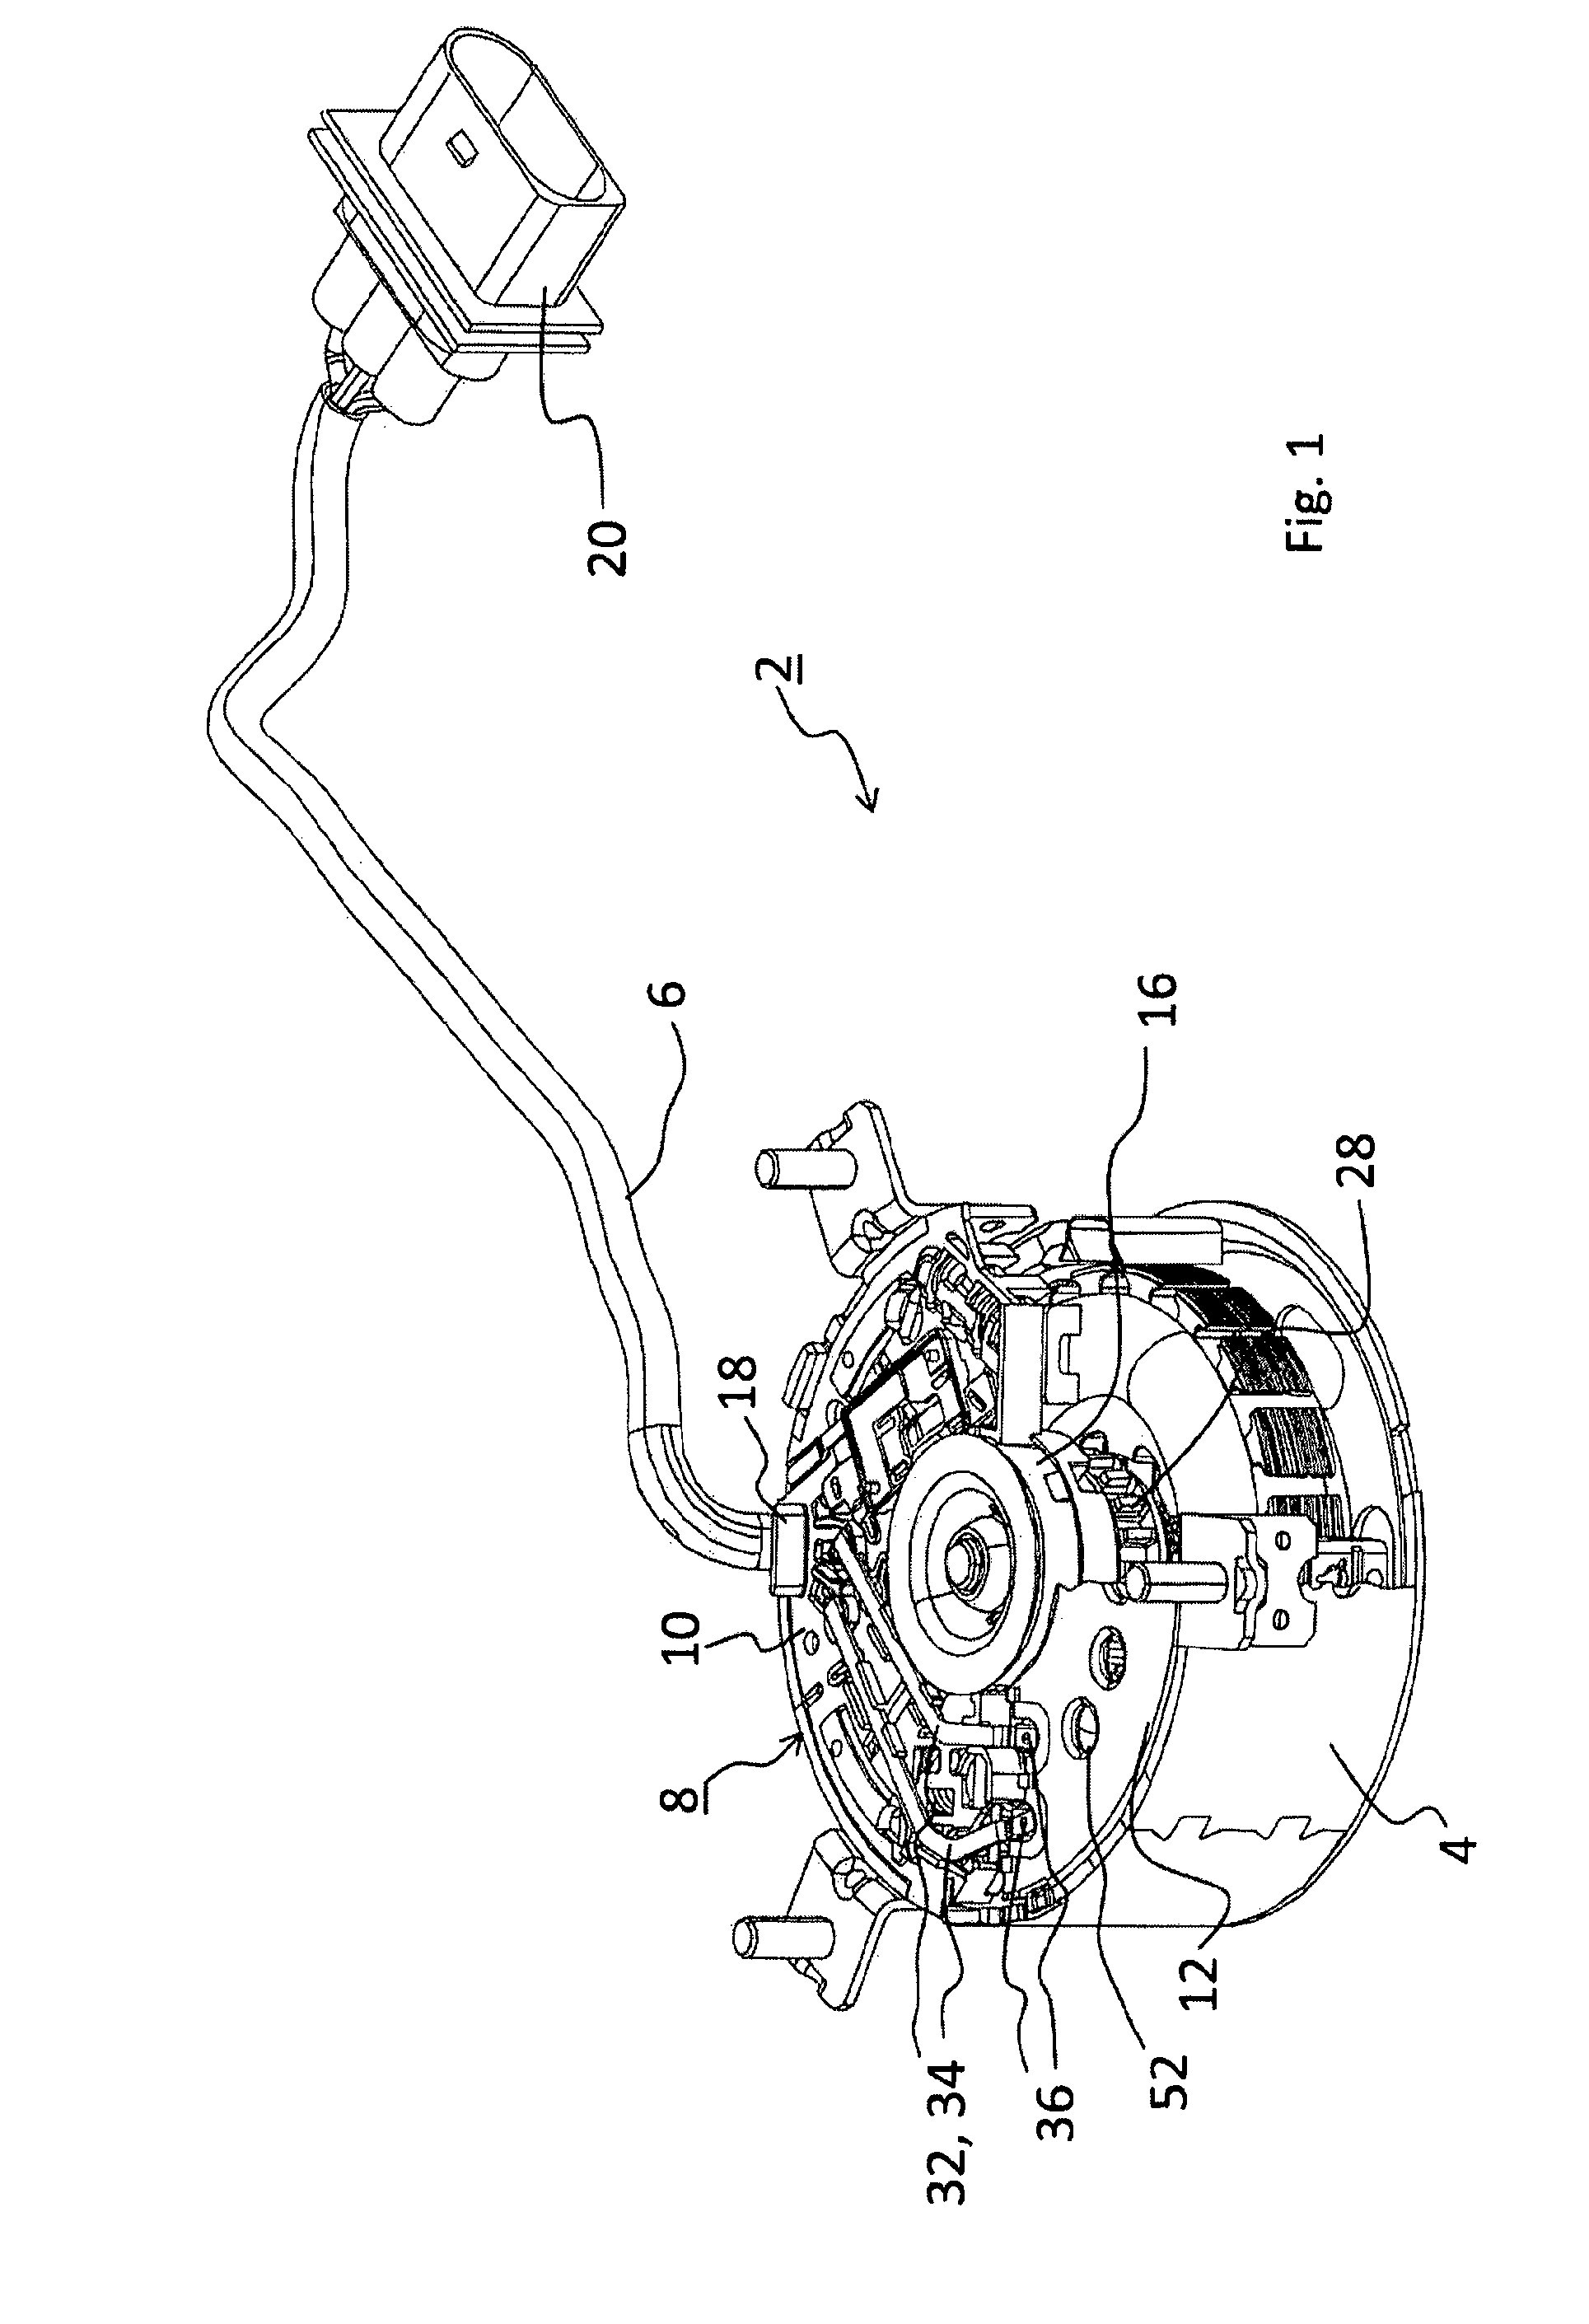 Brush system for an electric motor